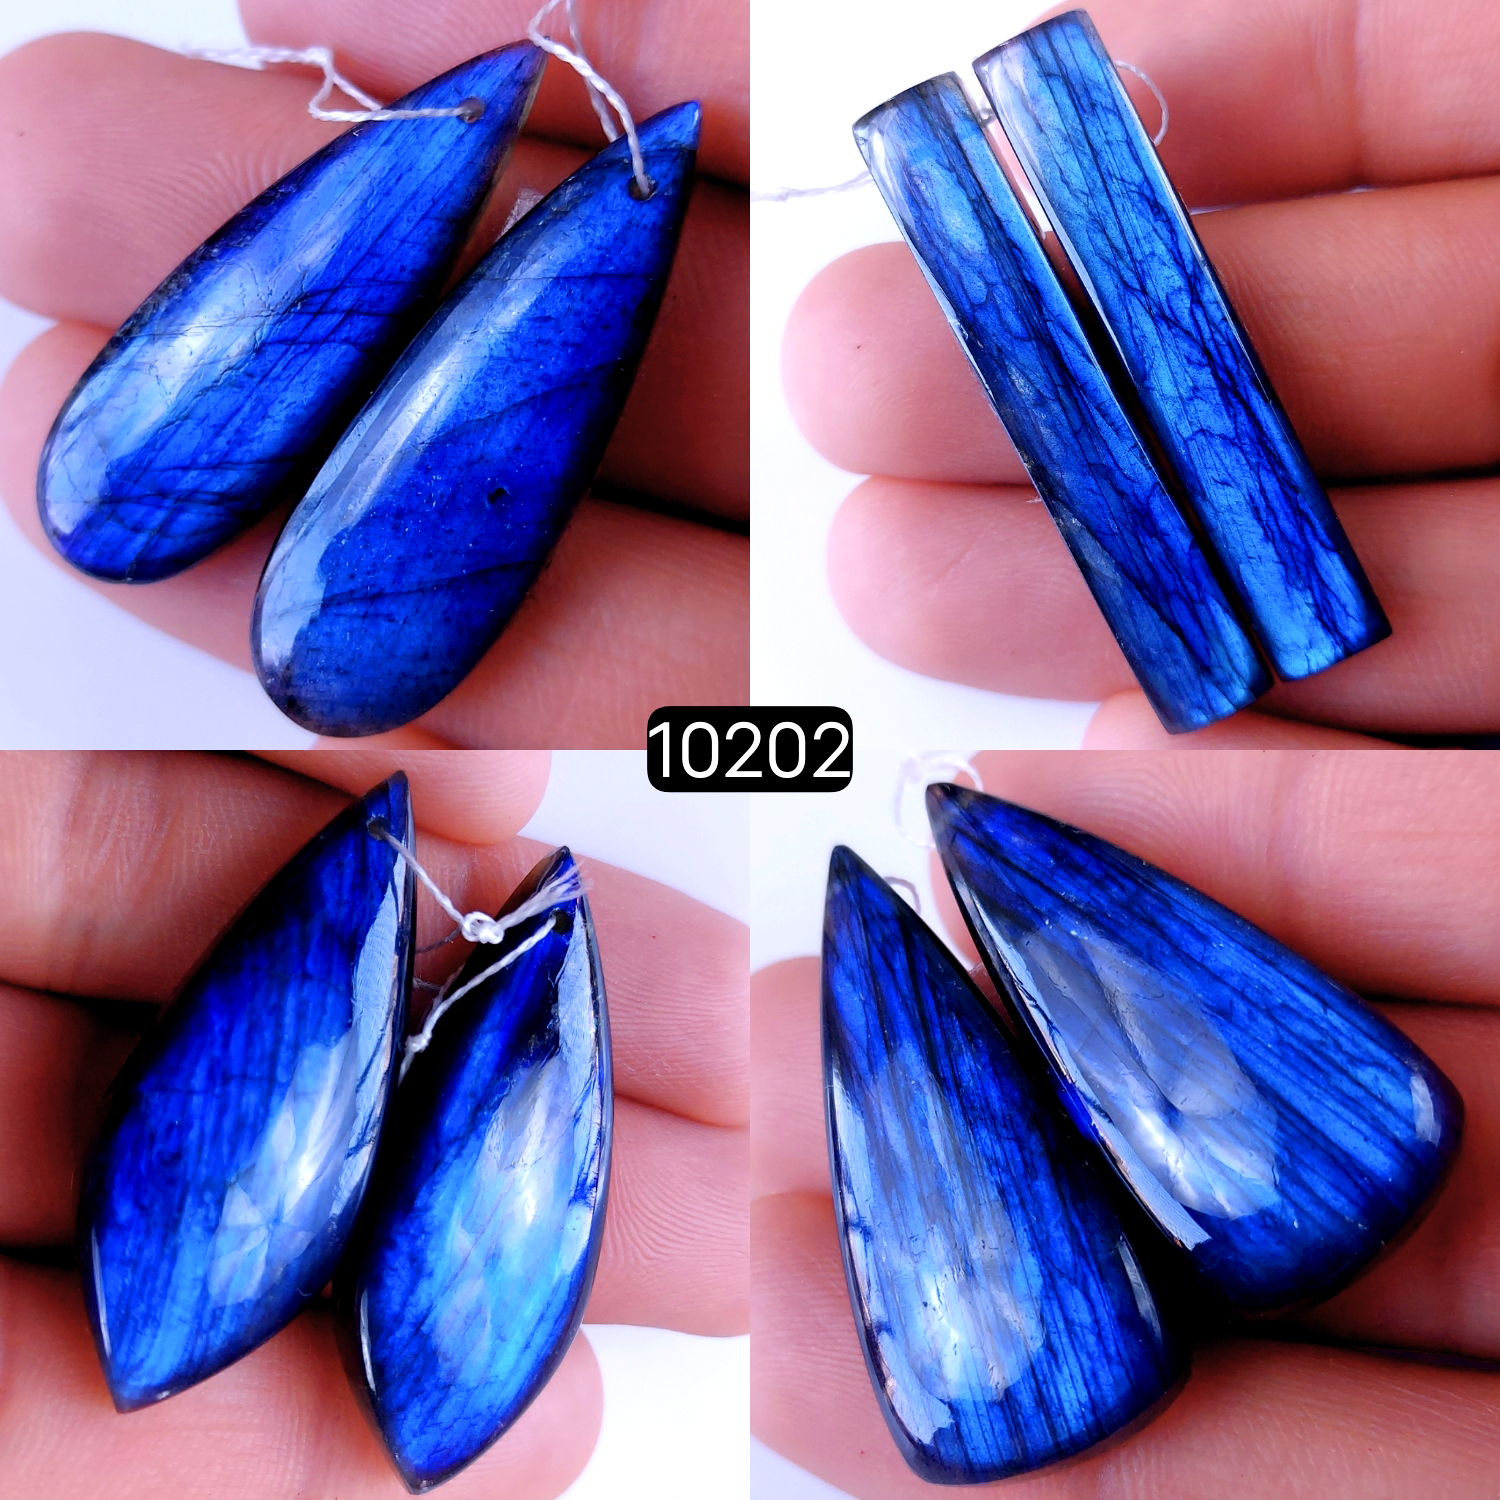 4Pair 185Cts Natural Labradorite Crystal Drill Dangle Drop Earring Pairs Silver Earrings Blue Labradorite Hoop Jewelry  42x8 35x15mm #10202